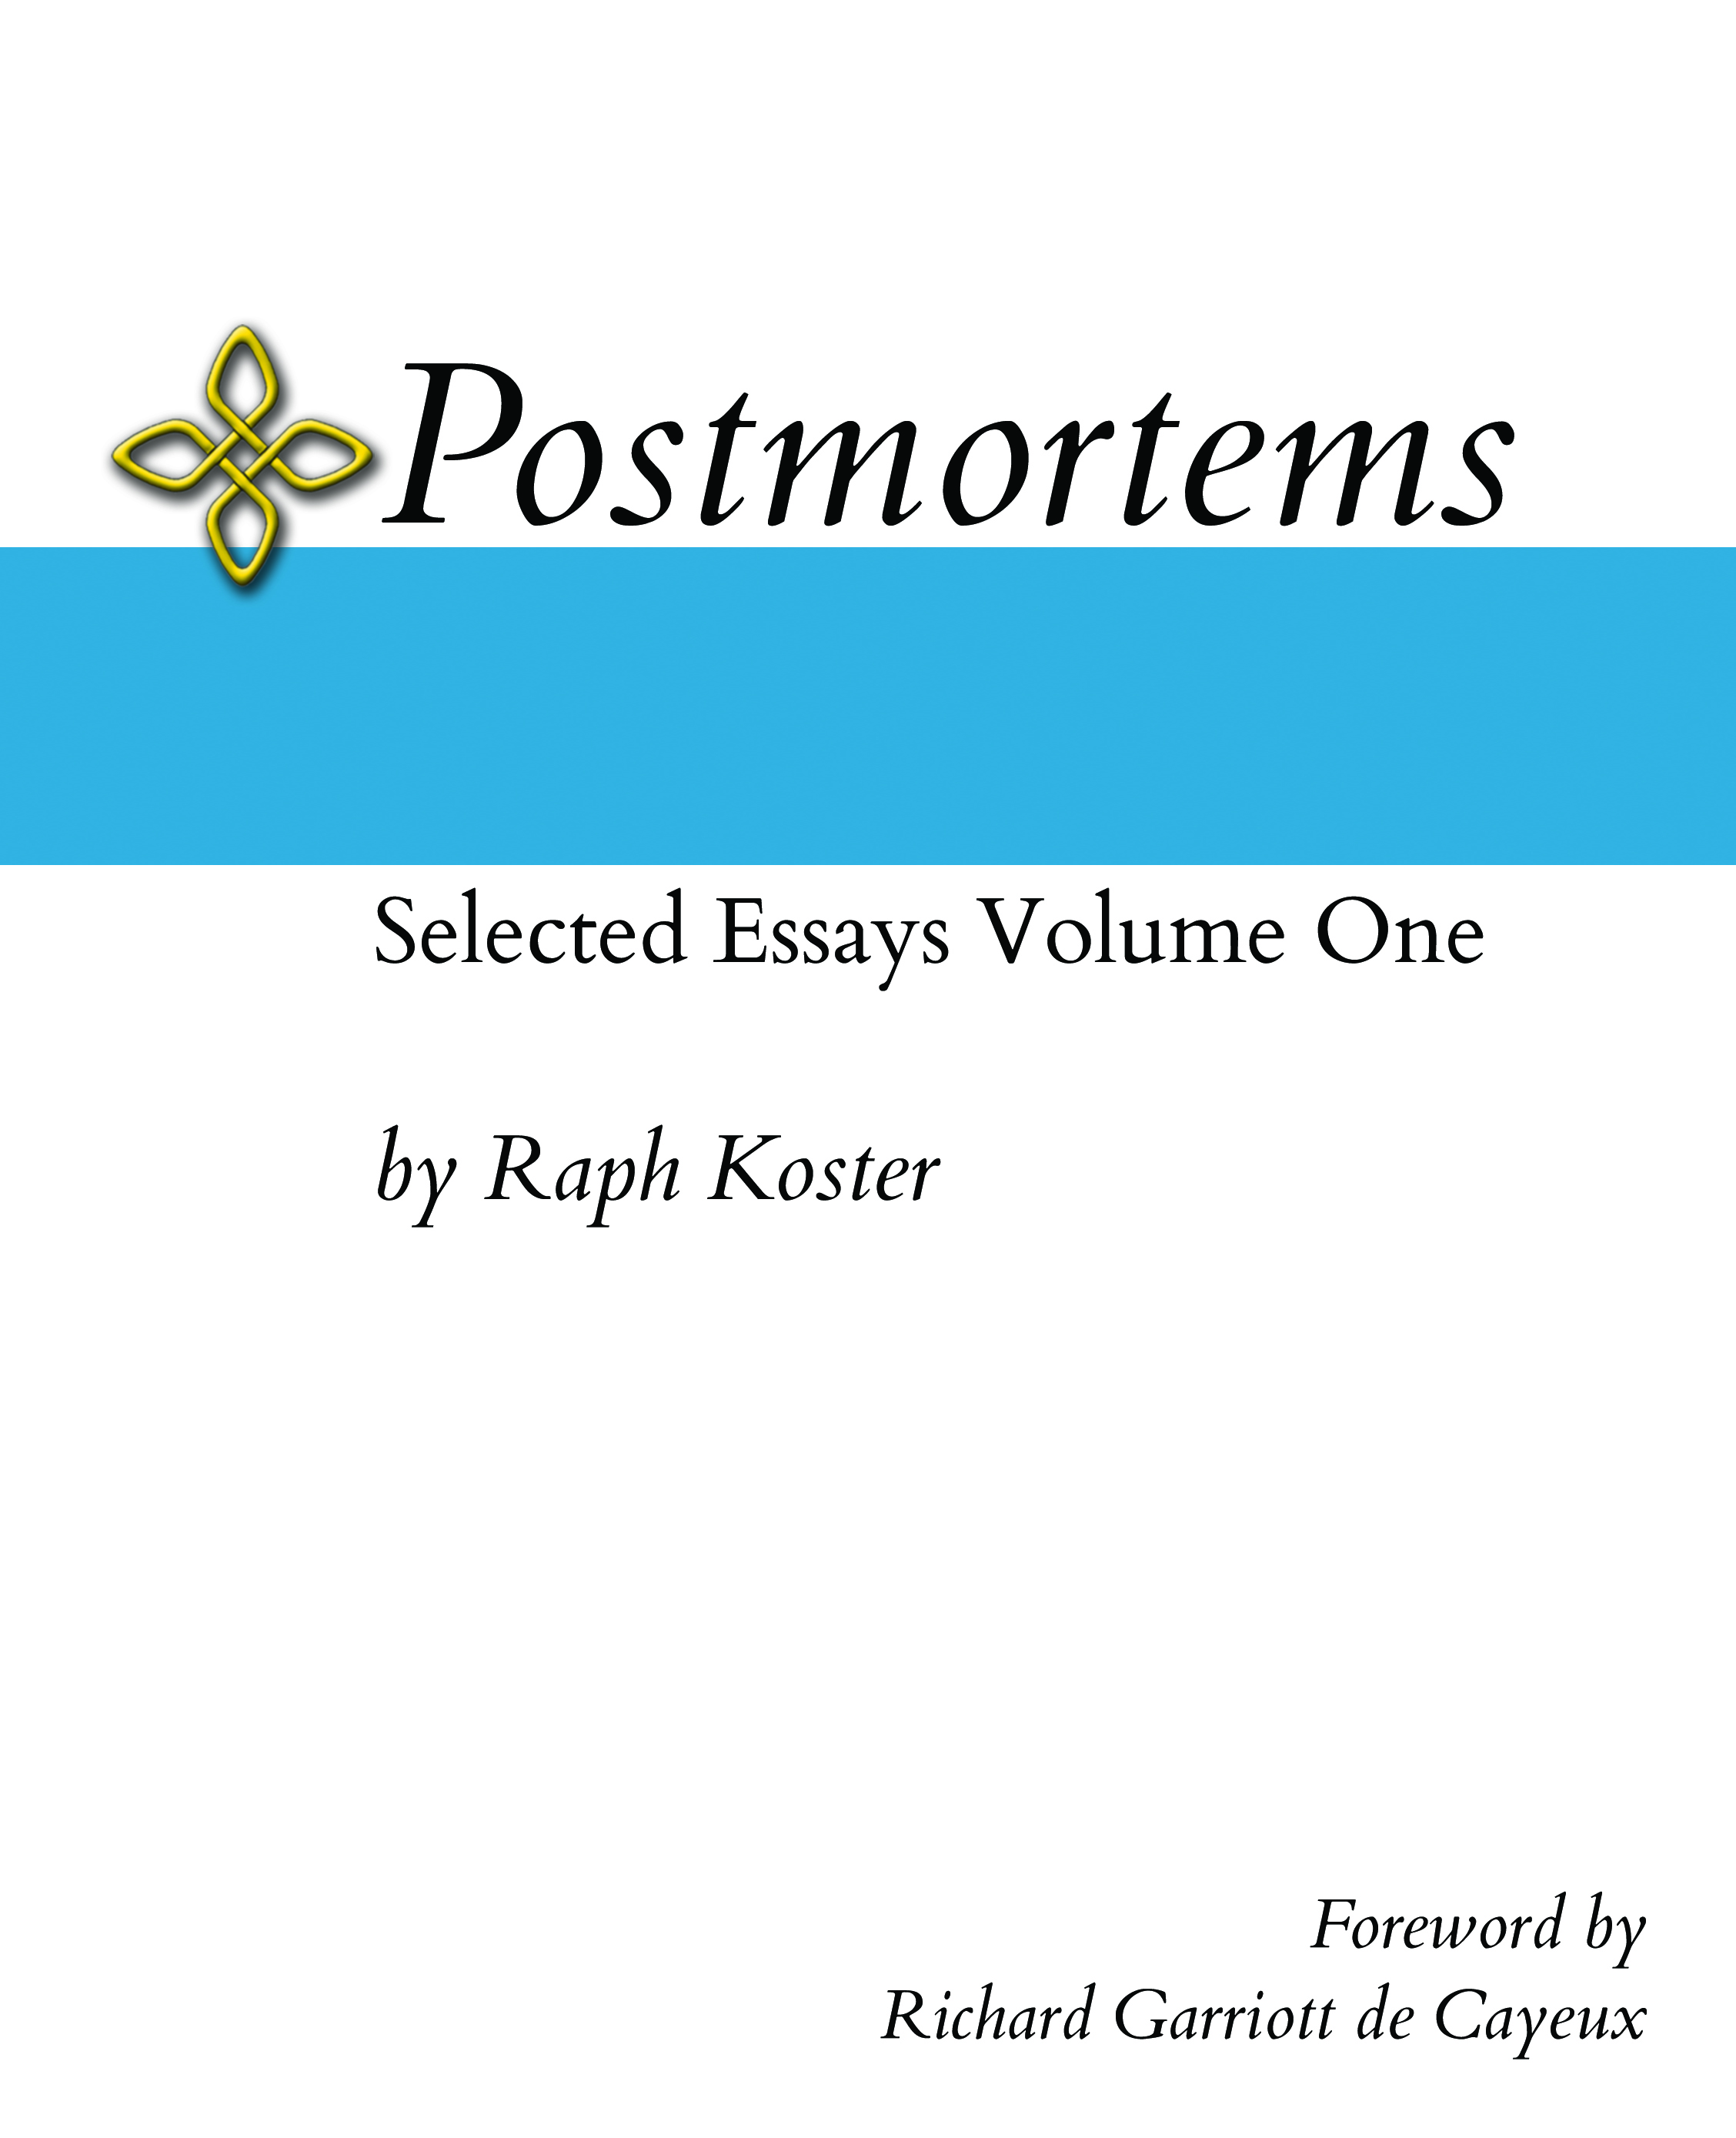 Postmortems cover